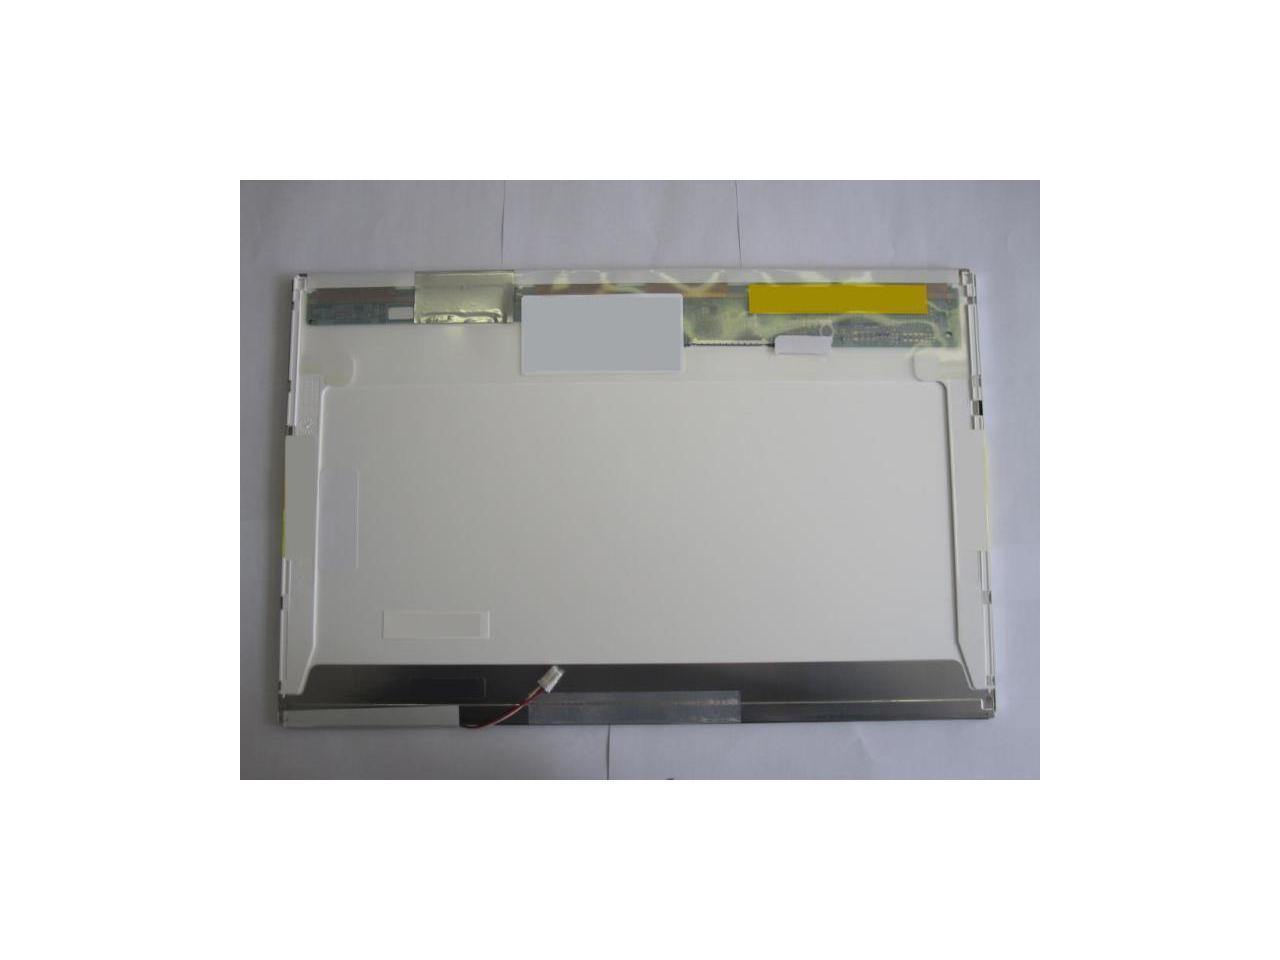 PC Parts Unlimited LQ154M1LW1C 15.4 1920x1200 LCD Screen for PANASONIC TOUGHBOOK CF-52 Laptop